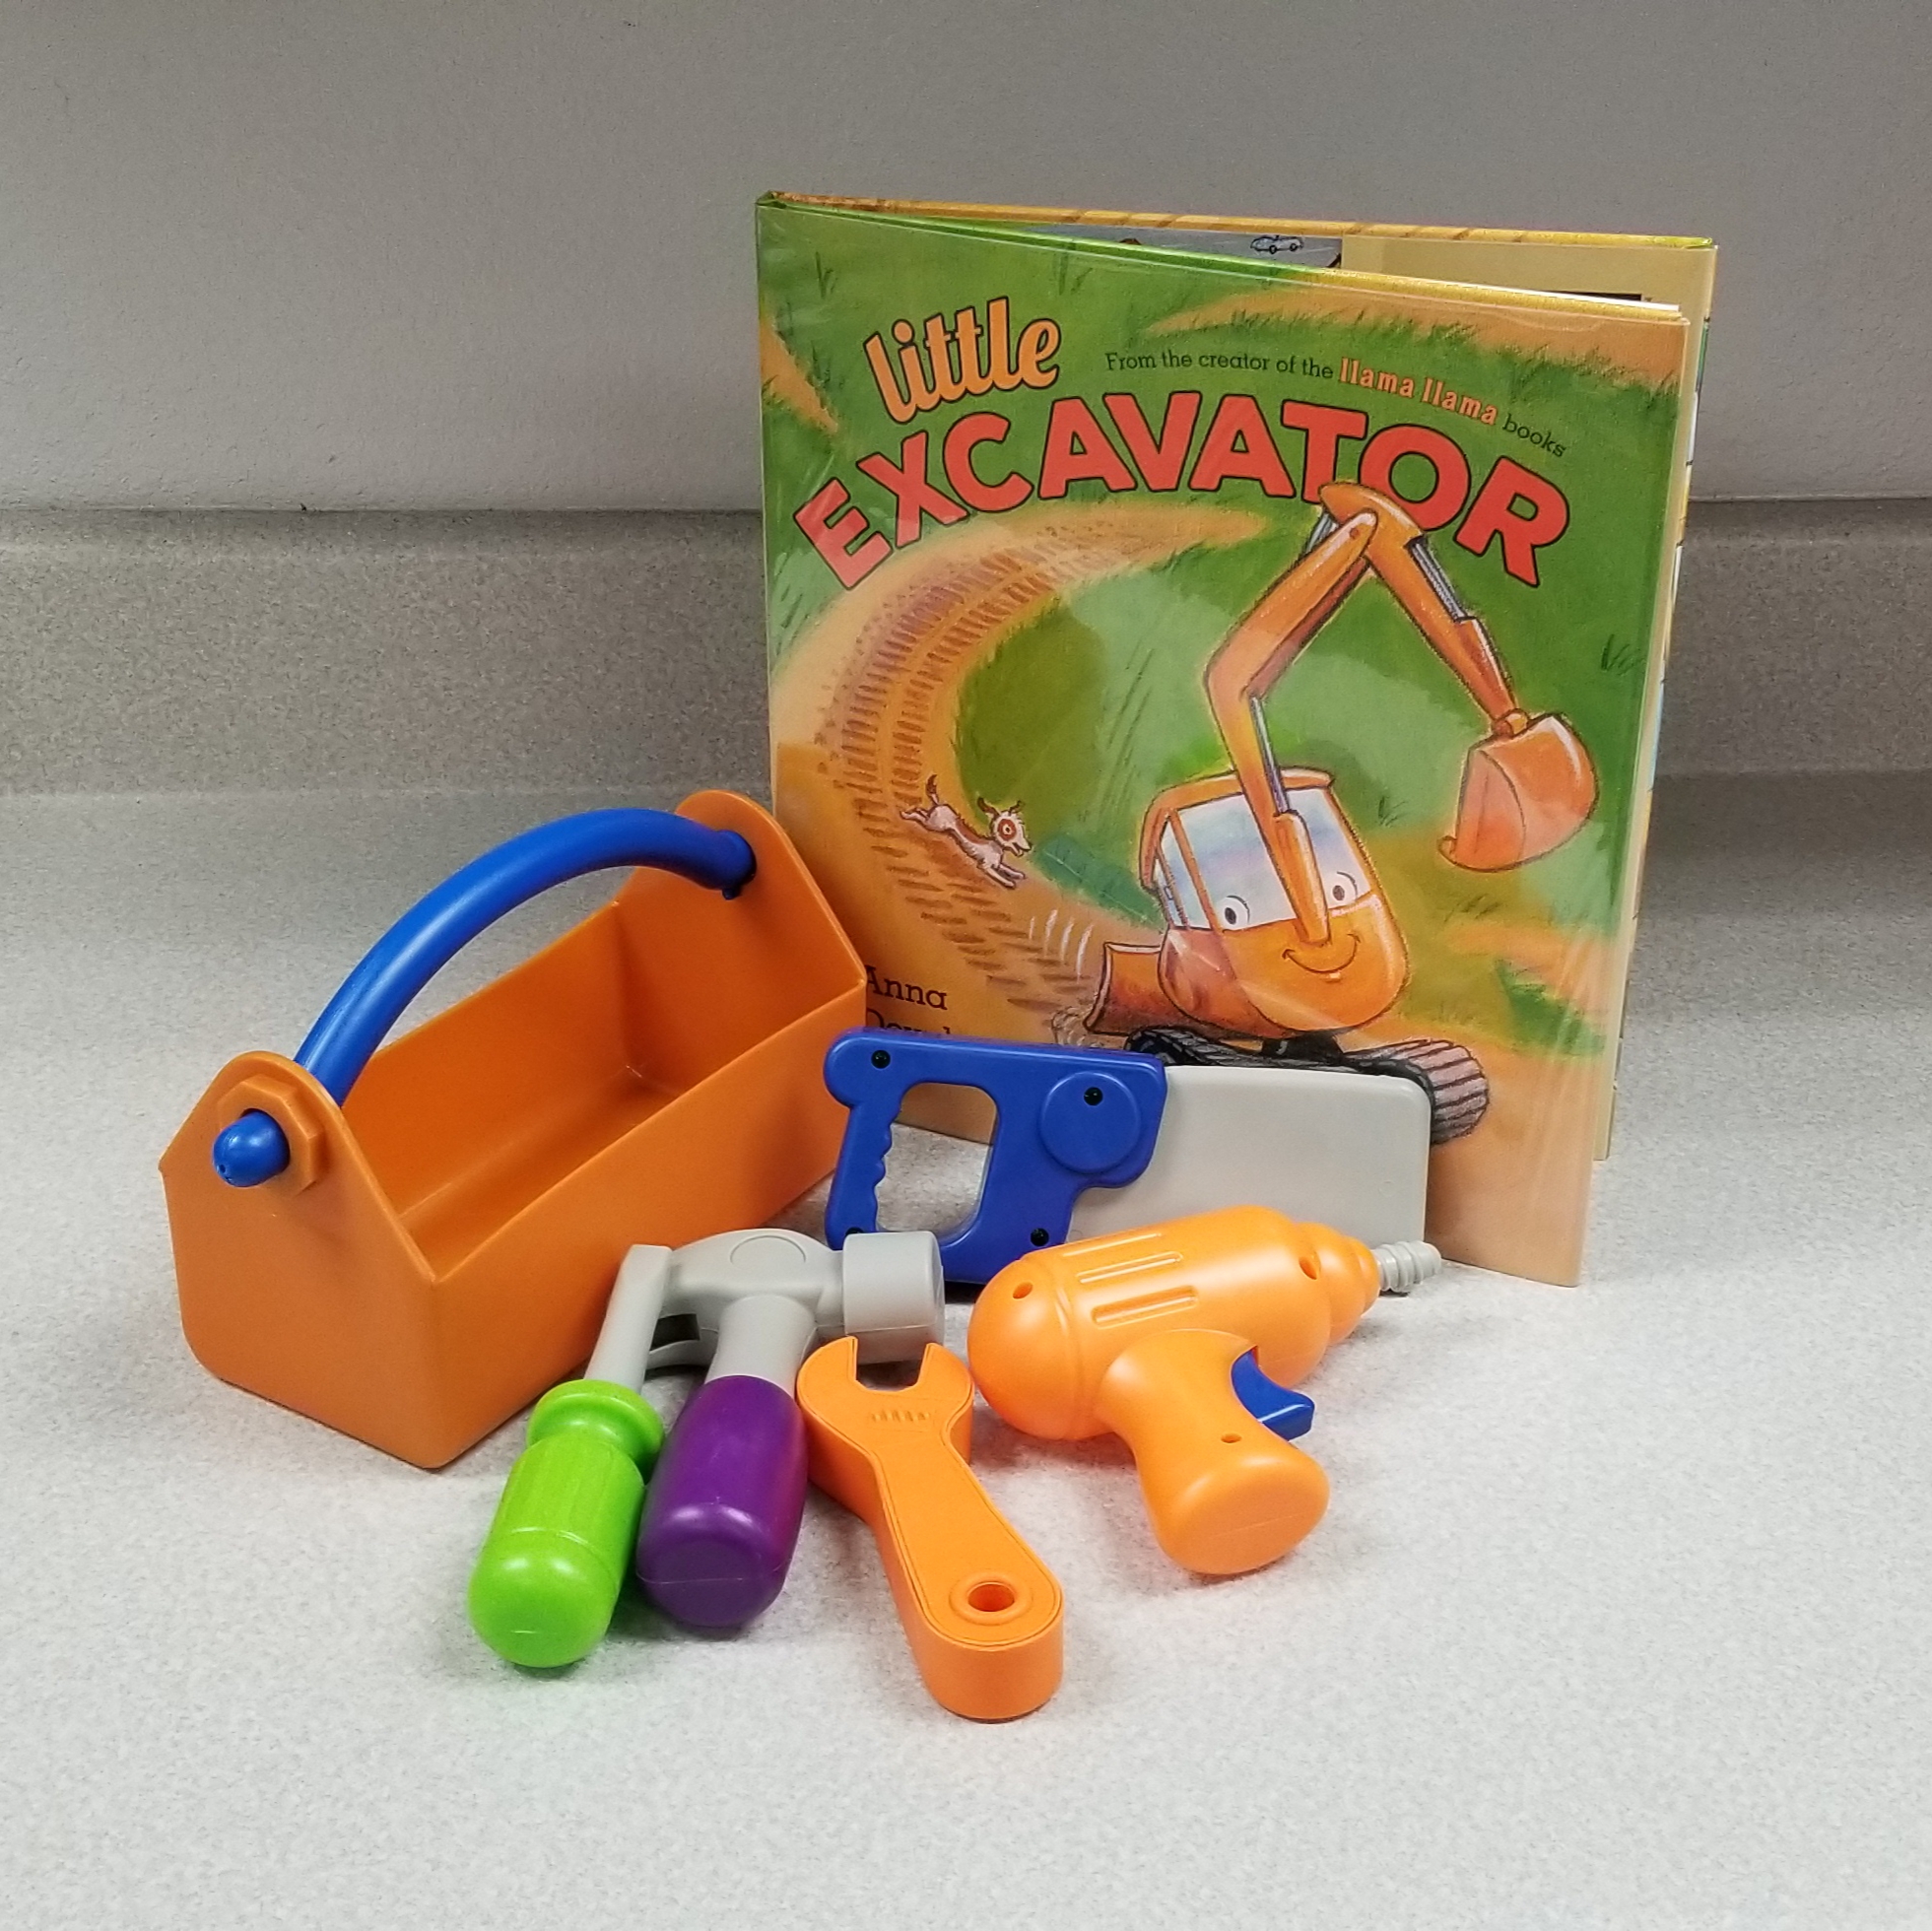 Image of toy toolbox and various tools with book "Little Excavator"